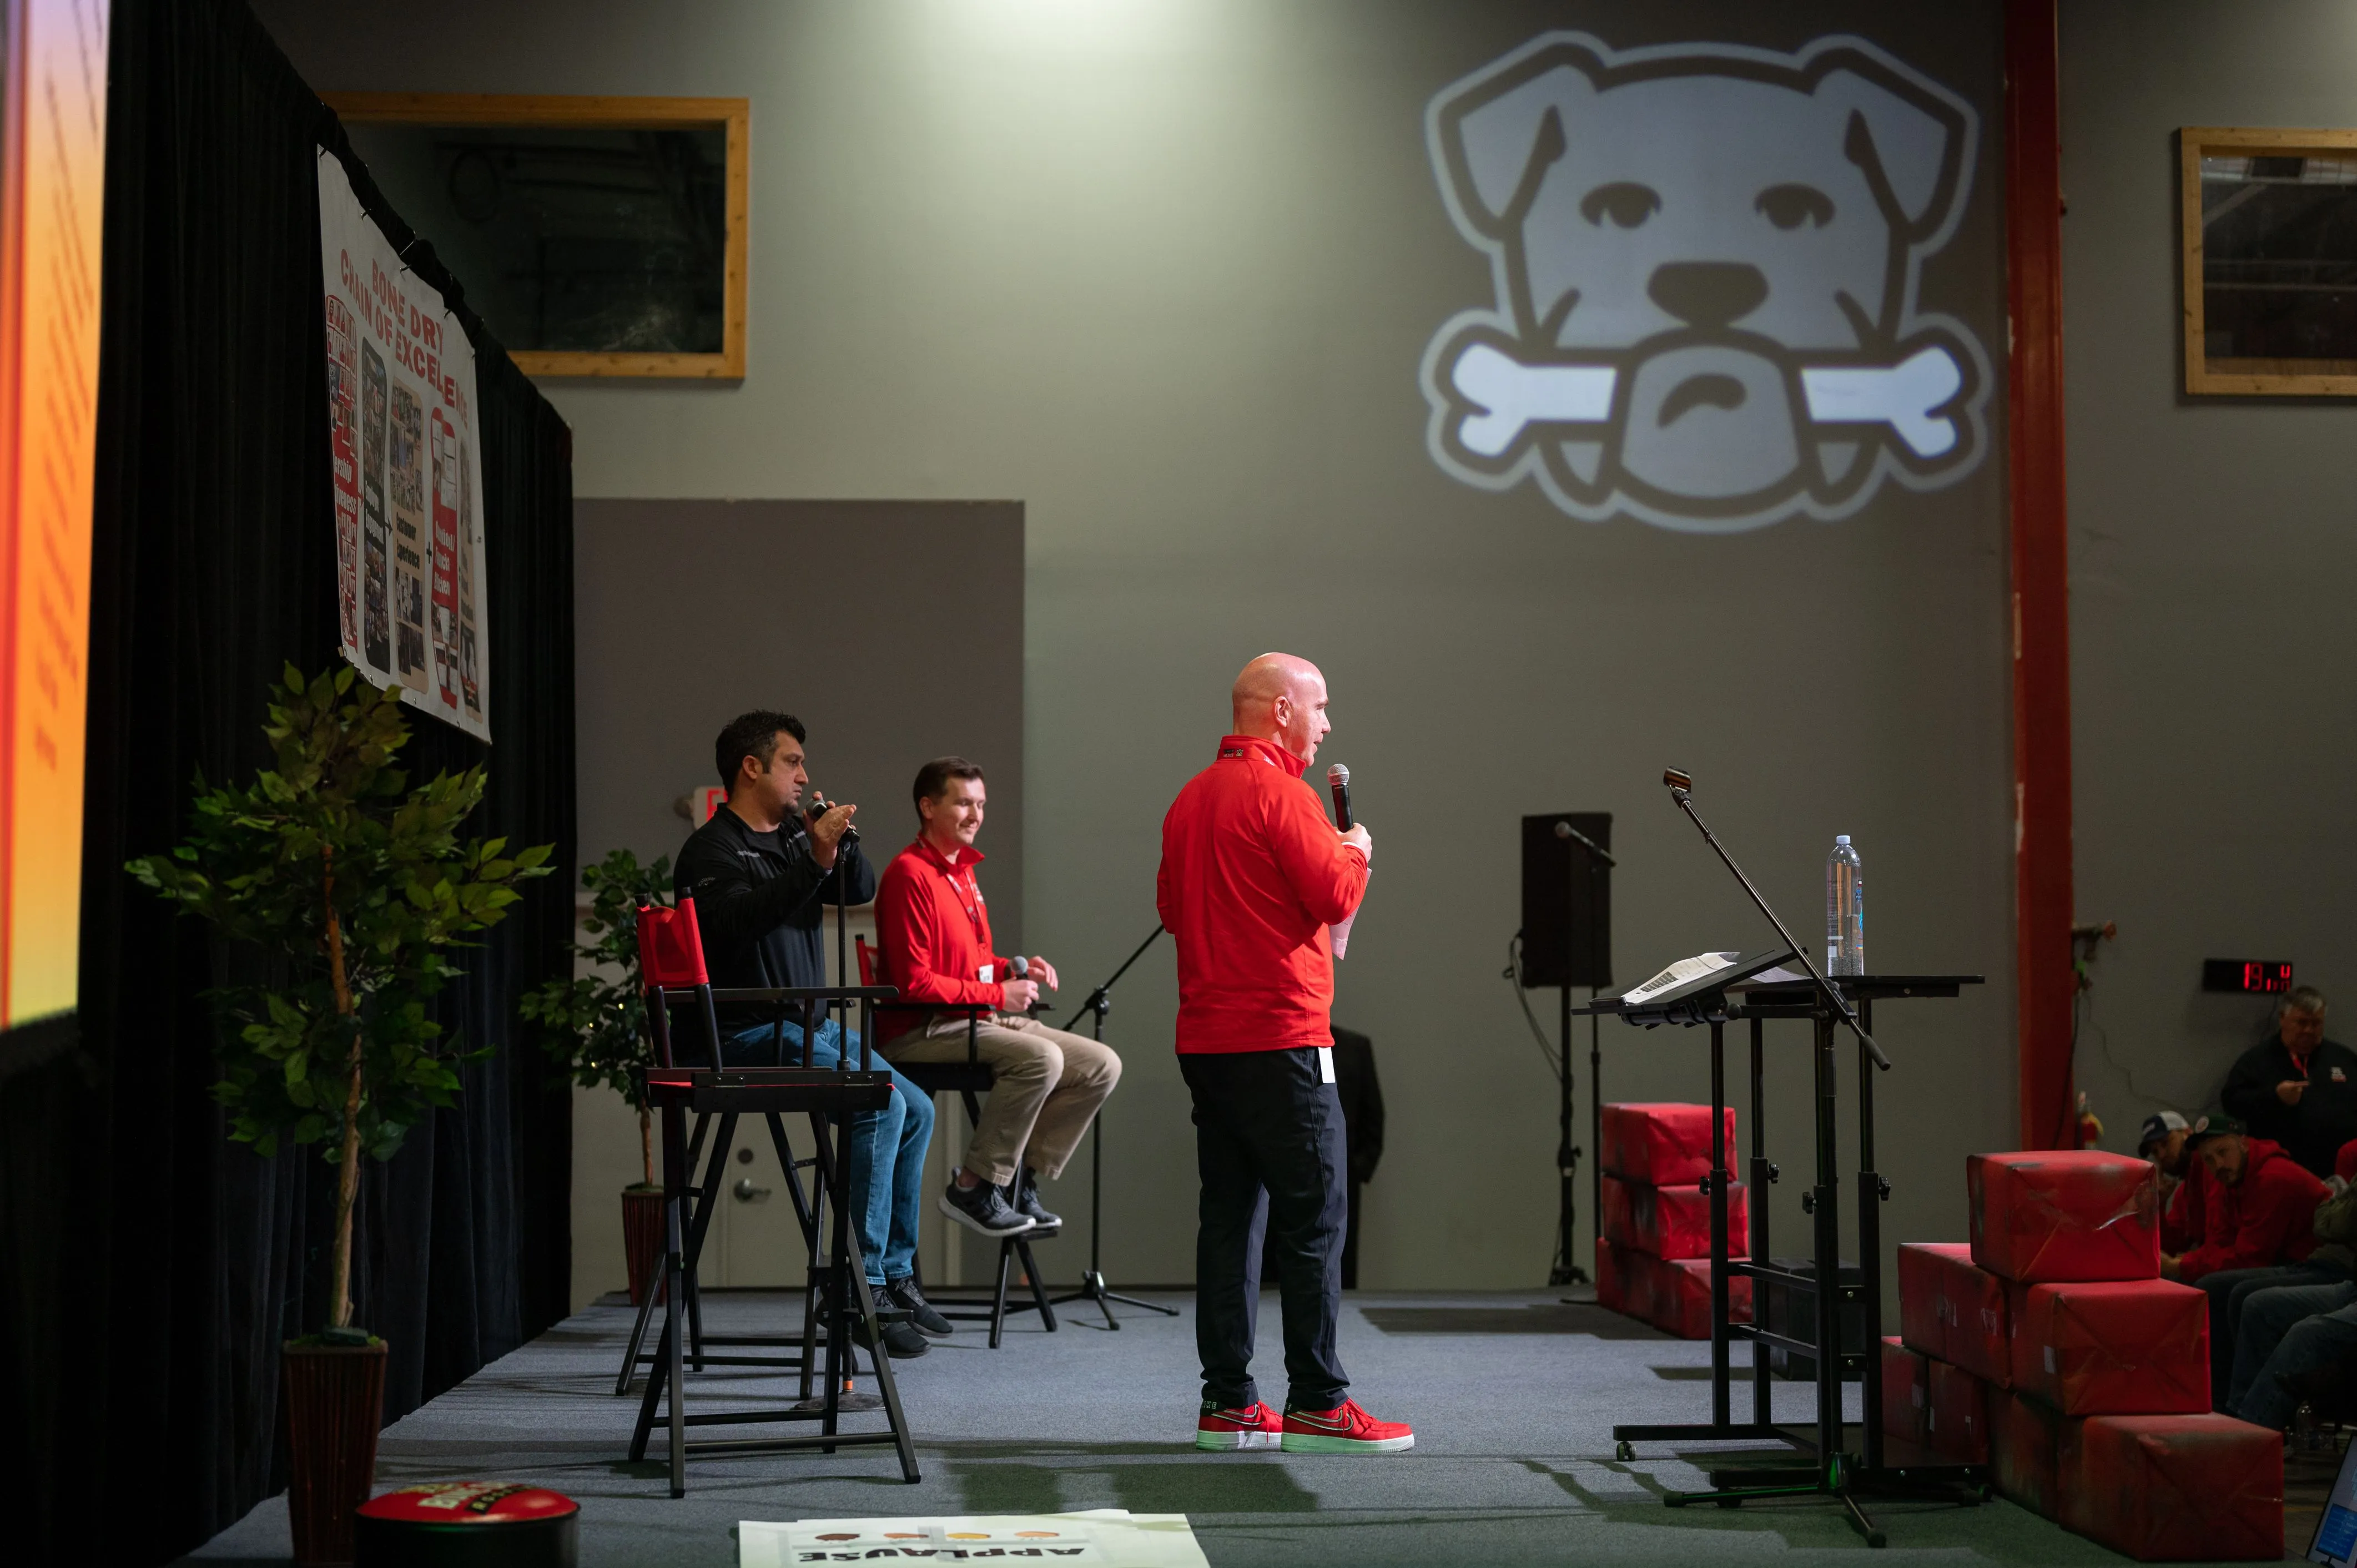 Three people on stage at an event with a cartoon dog logo projected on the wall behind them.